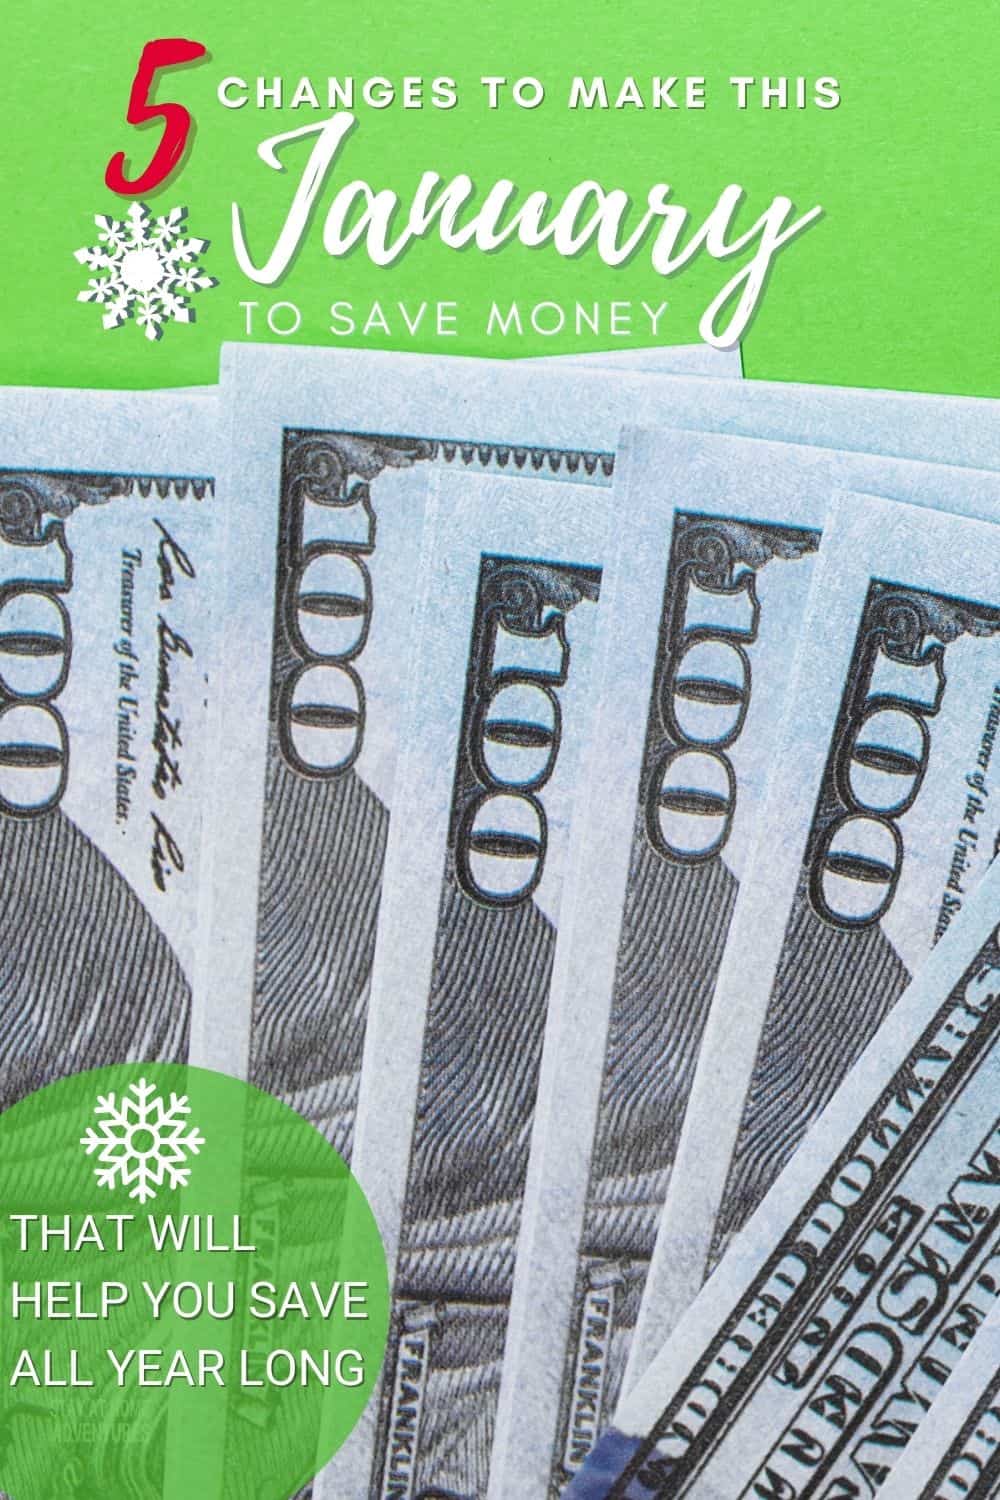 Want to save money in January? Learn 5 changes to make in January that will save money all year long. Start in January and see your savings grow. via @mystayathome